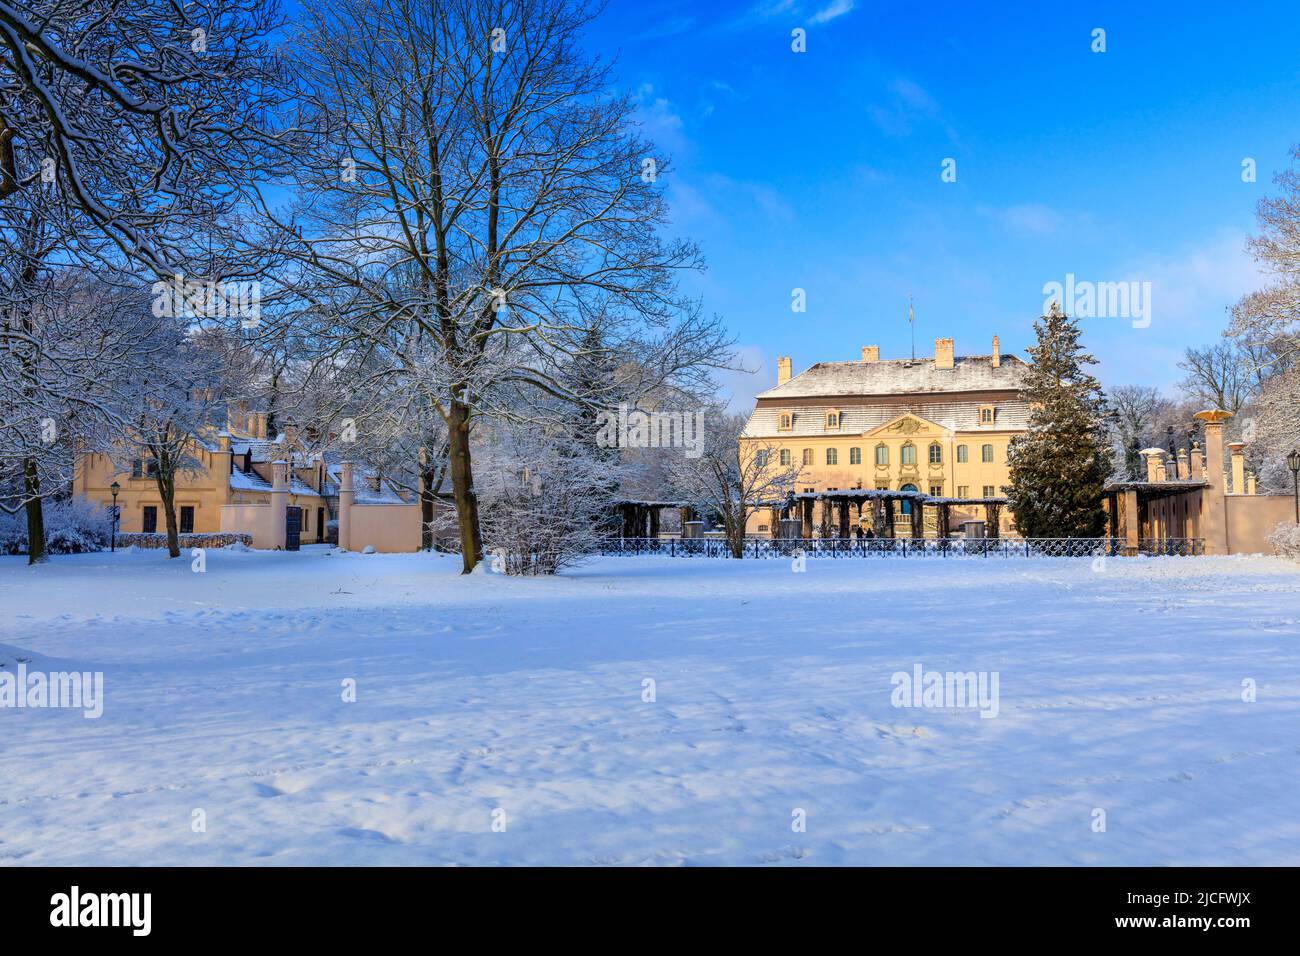 Branitz Castle in winter: The English-style landscape park created by Prince Herrmann von Pückler is one of Cottbus's special attractions. Stock Photo